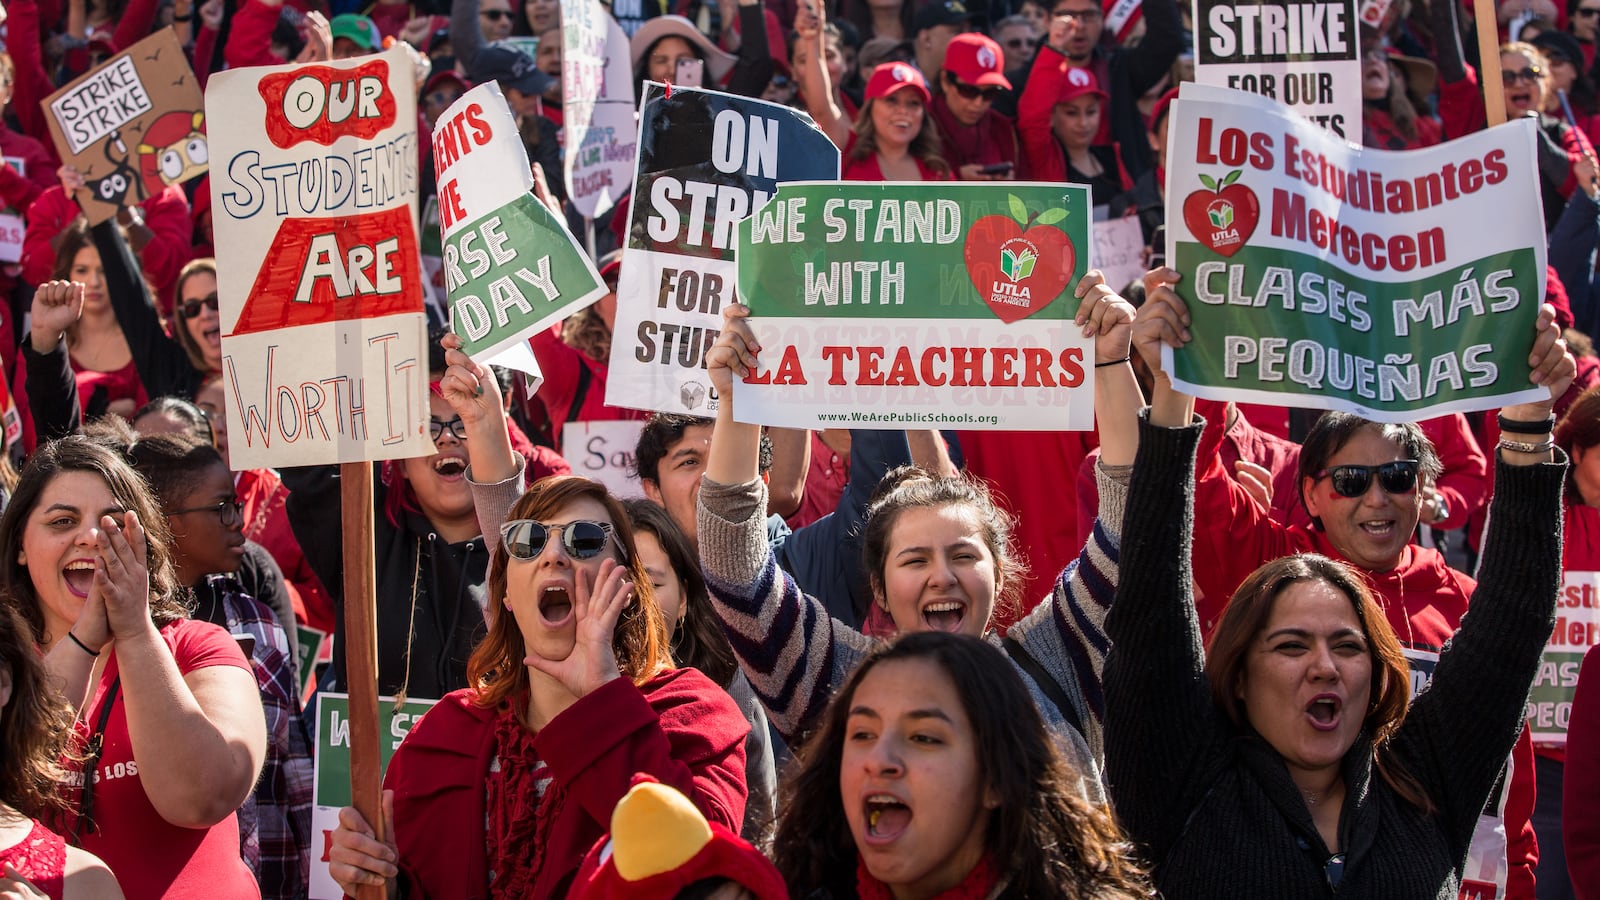 Thousands of striking Los Angeles teachers cheered at a January 2019 rally after it was announced that a tentative deal between the teachers union and school district had been reached.